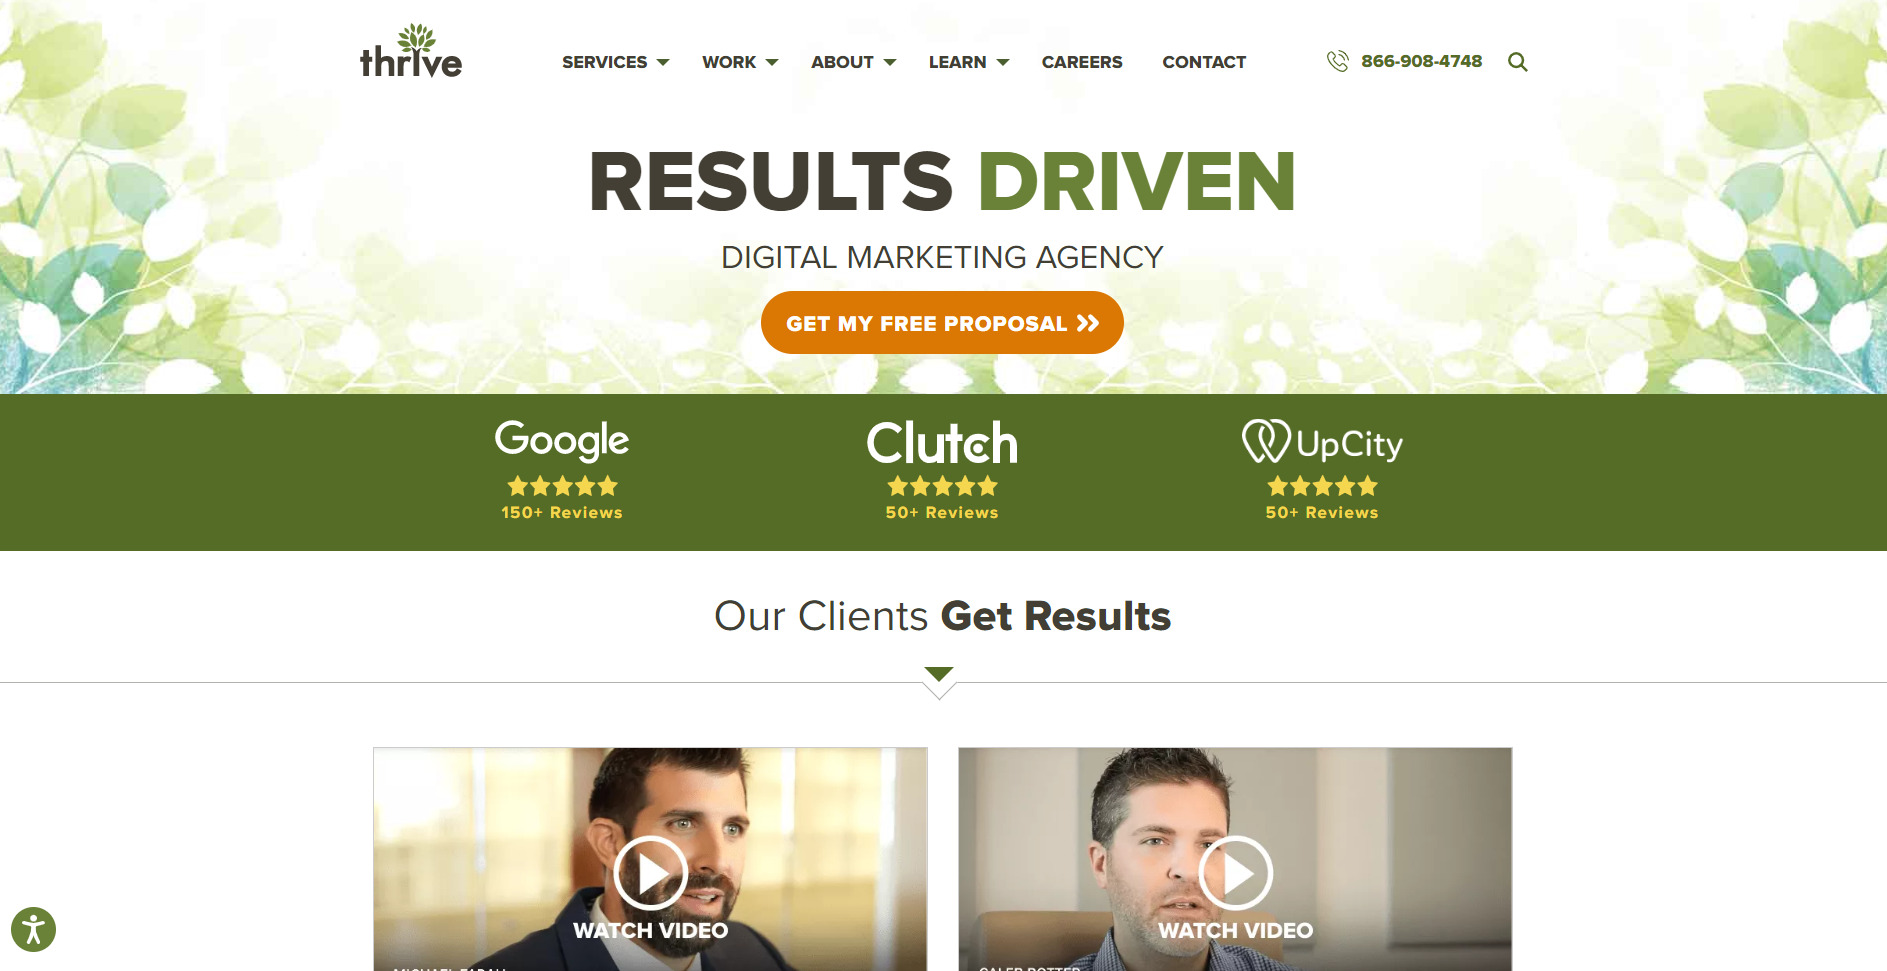 Thrive Results Driven Digital Marketing Agency Homepage